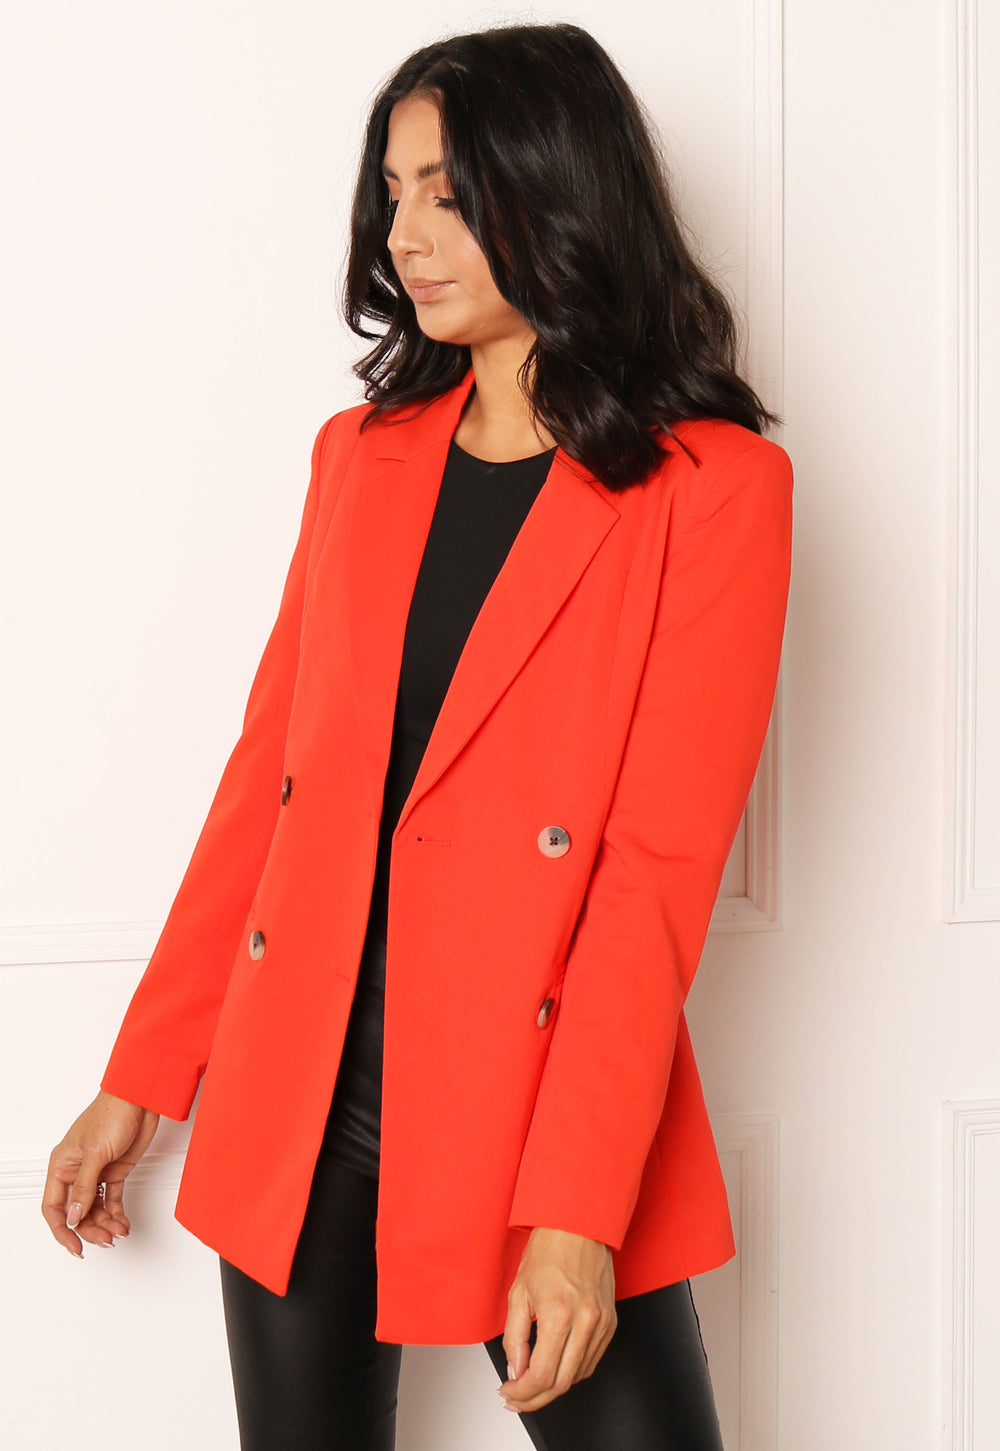 PIECES Amalie Tailored Double Breasted Blazer in Orange - One Nation Clothing